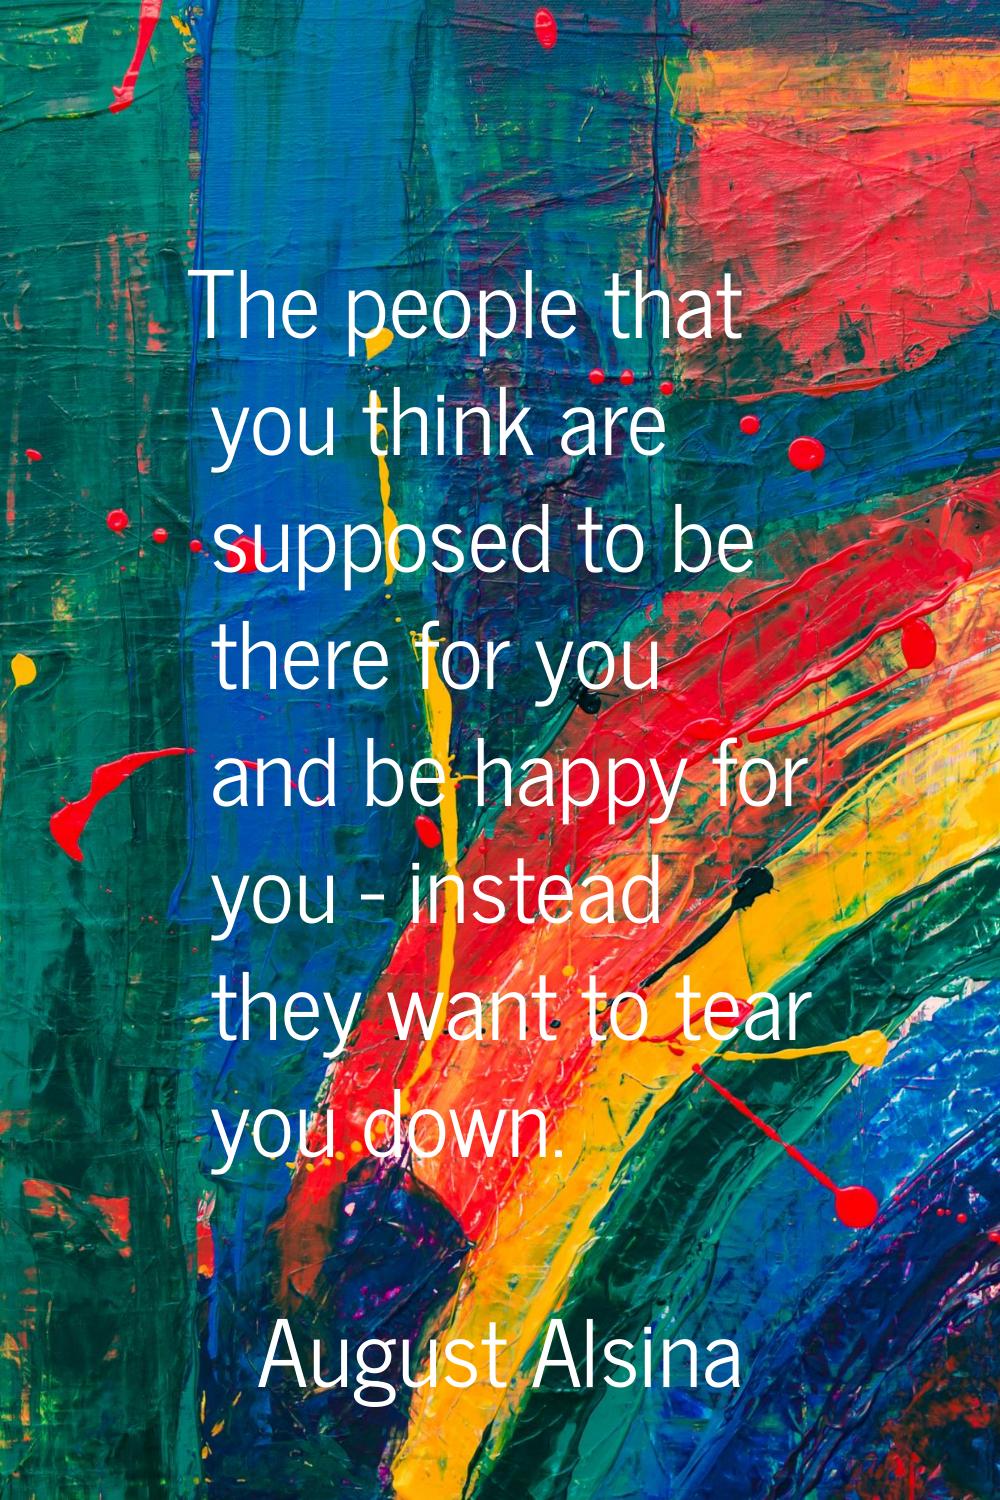 The people that you think are supposed to be there for you and be happy for you - instead they want